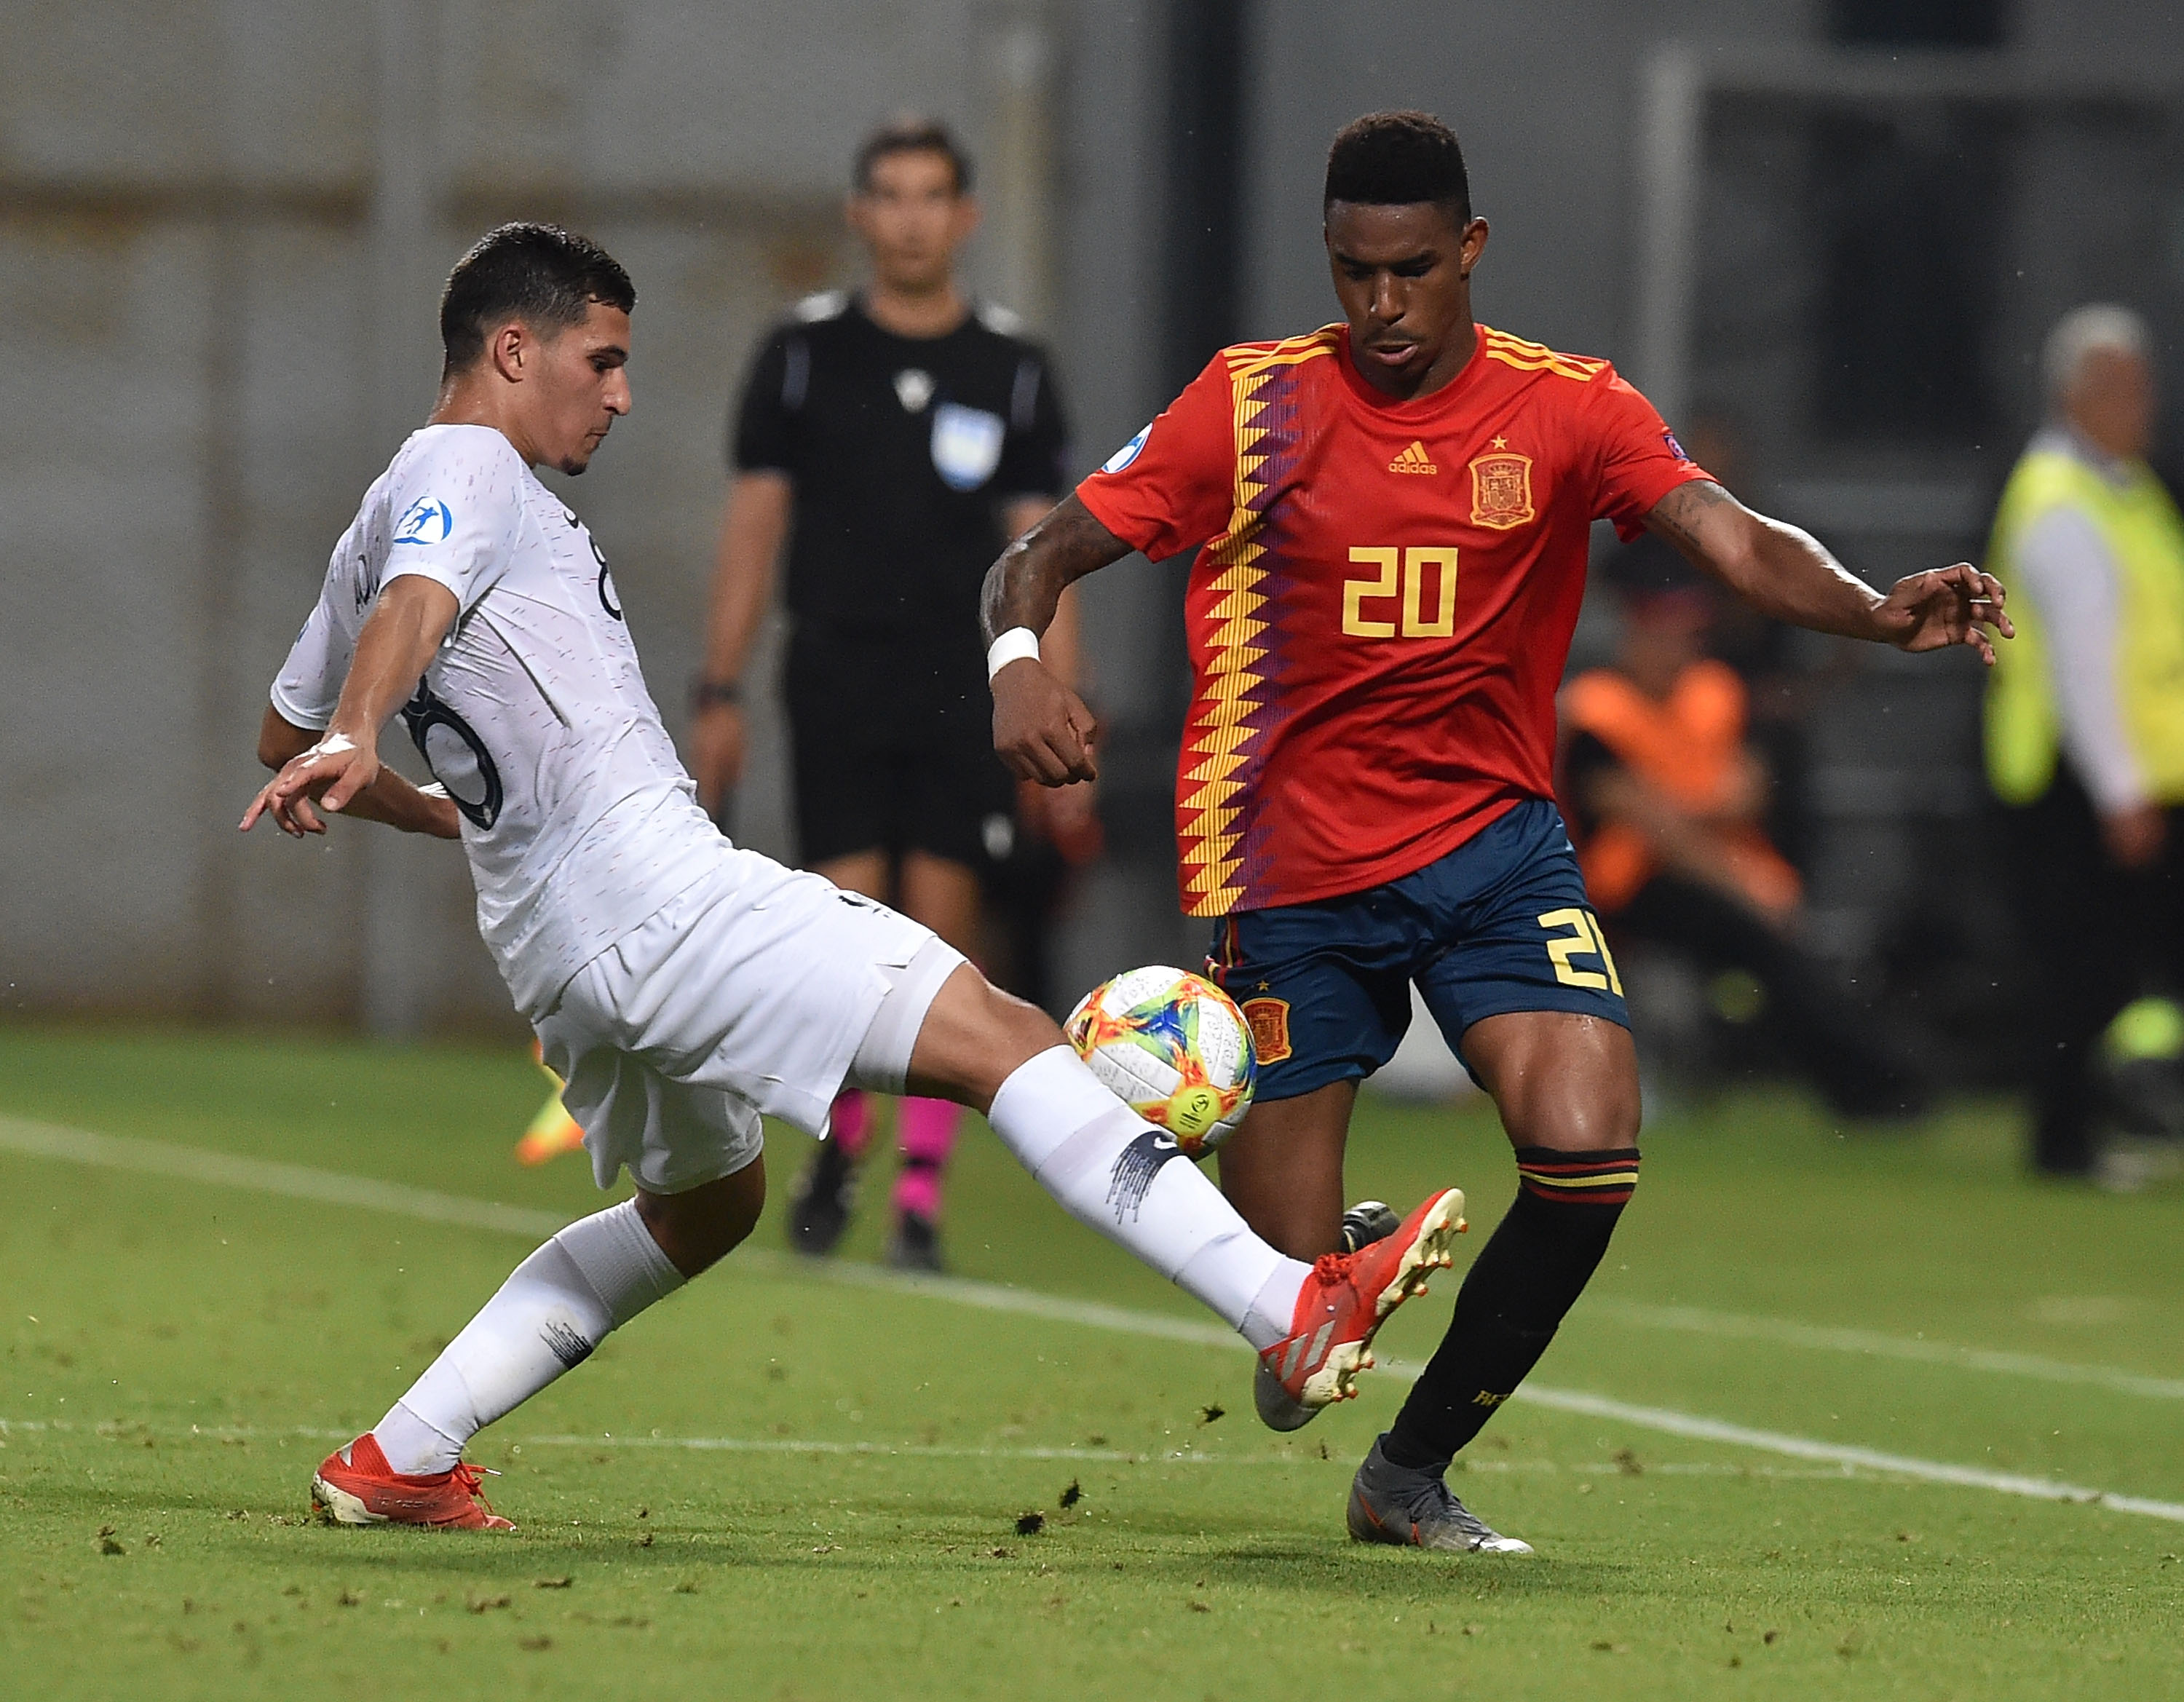 REGGIO NELL'EMILIA, ITALY - JUNE 27: Houssem Aouar of France and Junior Firpo of Spain in action during the 2019 UEFA U-21 Semi-Final match between Spain and France at Mapei Stadium - Citta' del Tricolore on June 27, 2019 in Reggio nell'Emilia, Italy.  (Photo by Giuseppe Bellini/Getty Images)